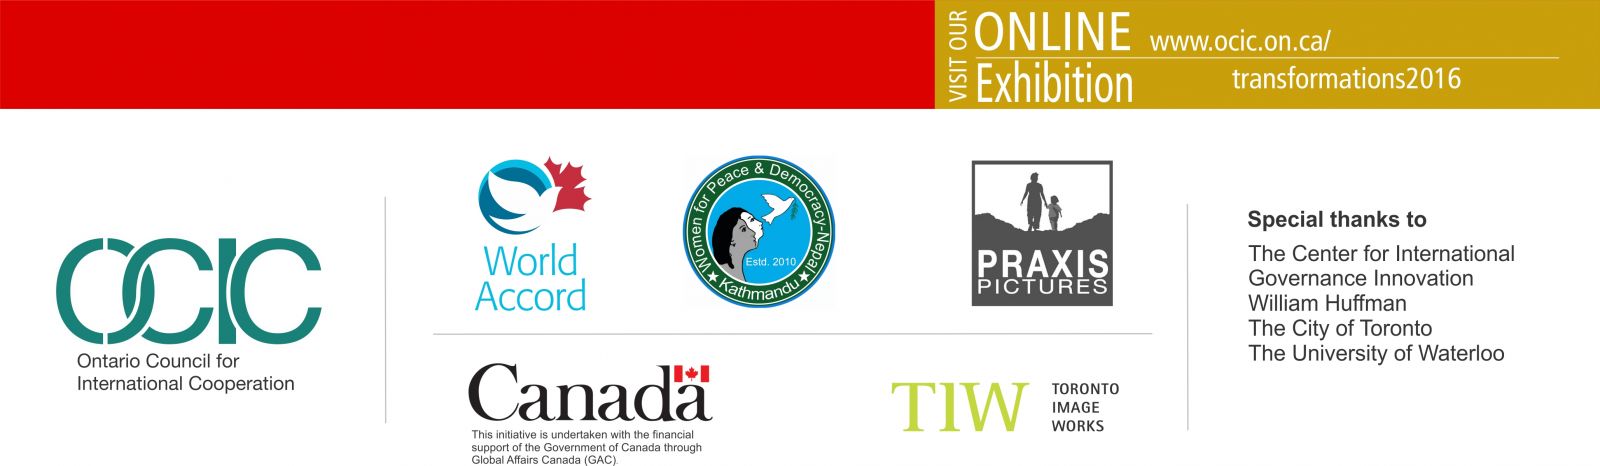 Red and gold banner at top: View our Online Exhibition www.ocic.on.ca/transformations2016. Below are partner logos: OCIC, World Accord, Women for Peace and Democracy Nepal, Praxis Pictures, Government of Canada, Toronto Image Works. Special Thanks to: The Centre for International Governance Innovation, William Huffman, The City of Toronto, The University of Waterloo.